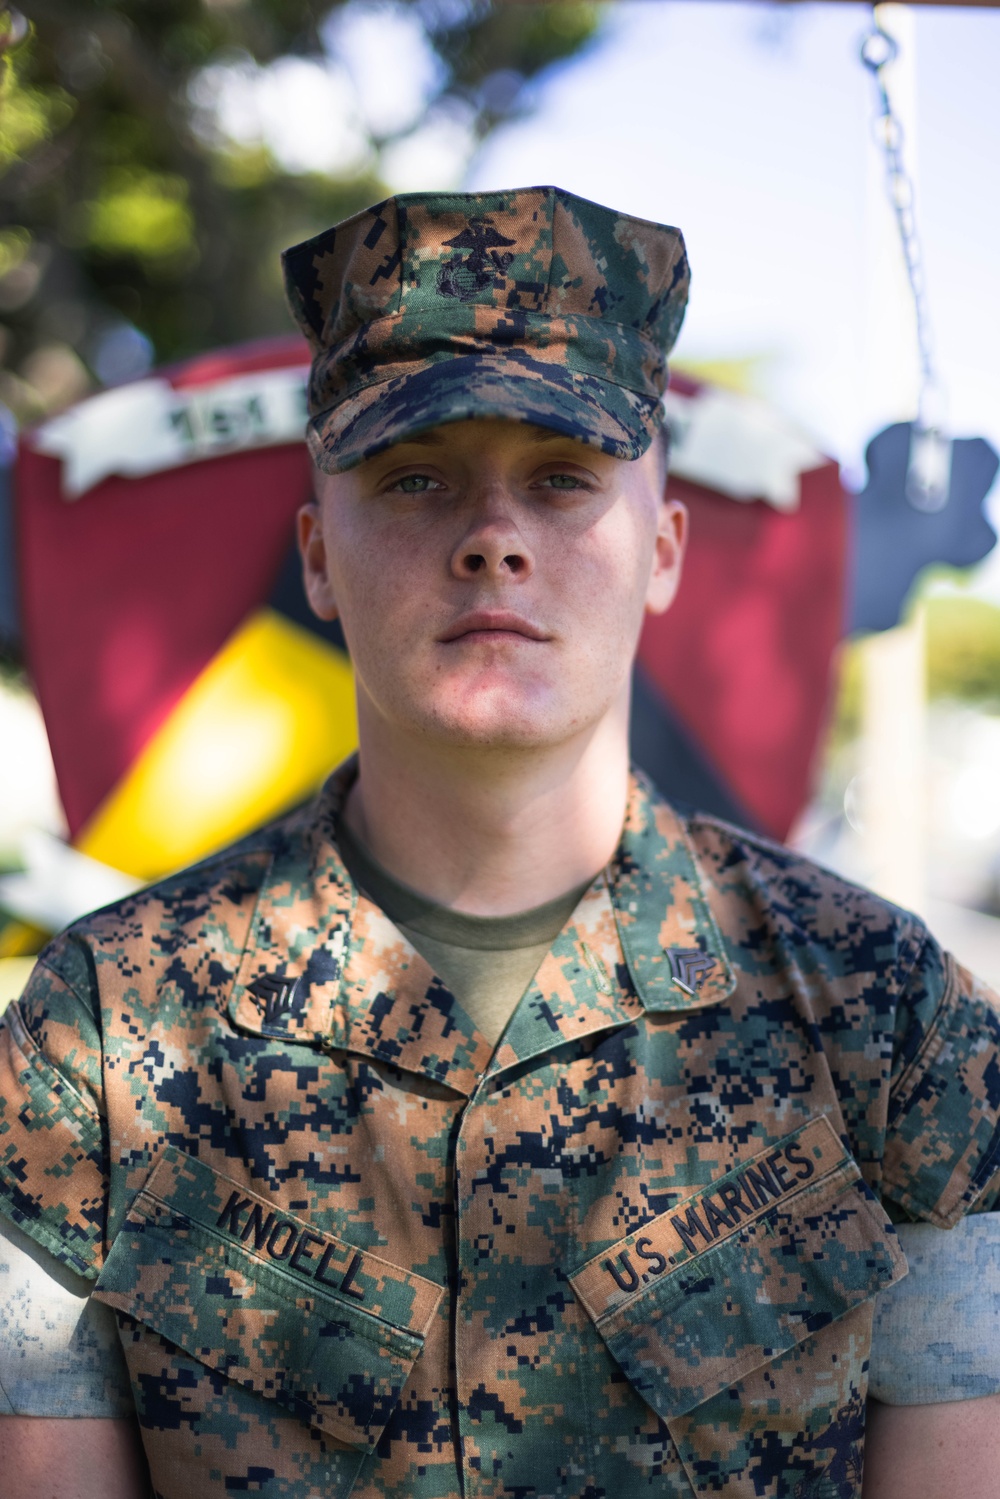 Marines with 1/12 talk about the Direct Affiliation Program